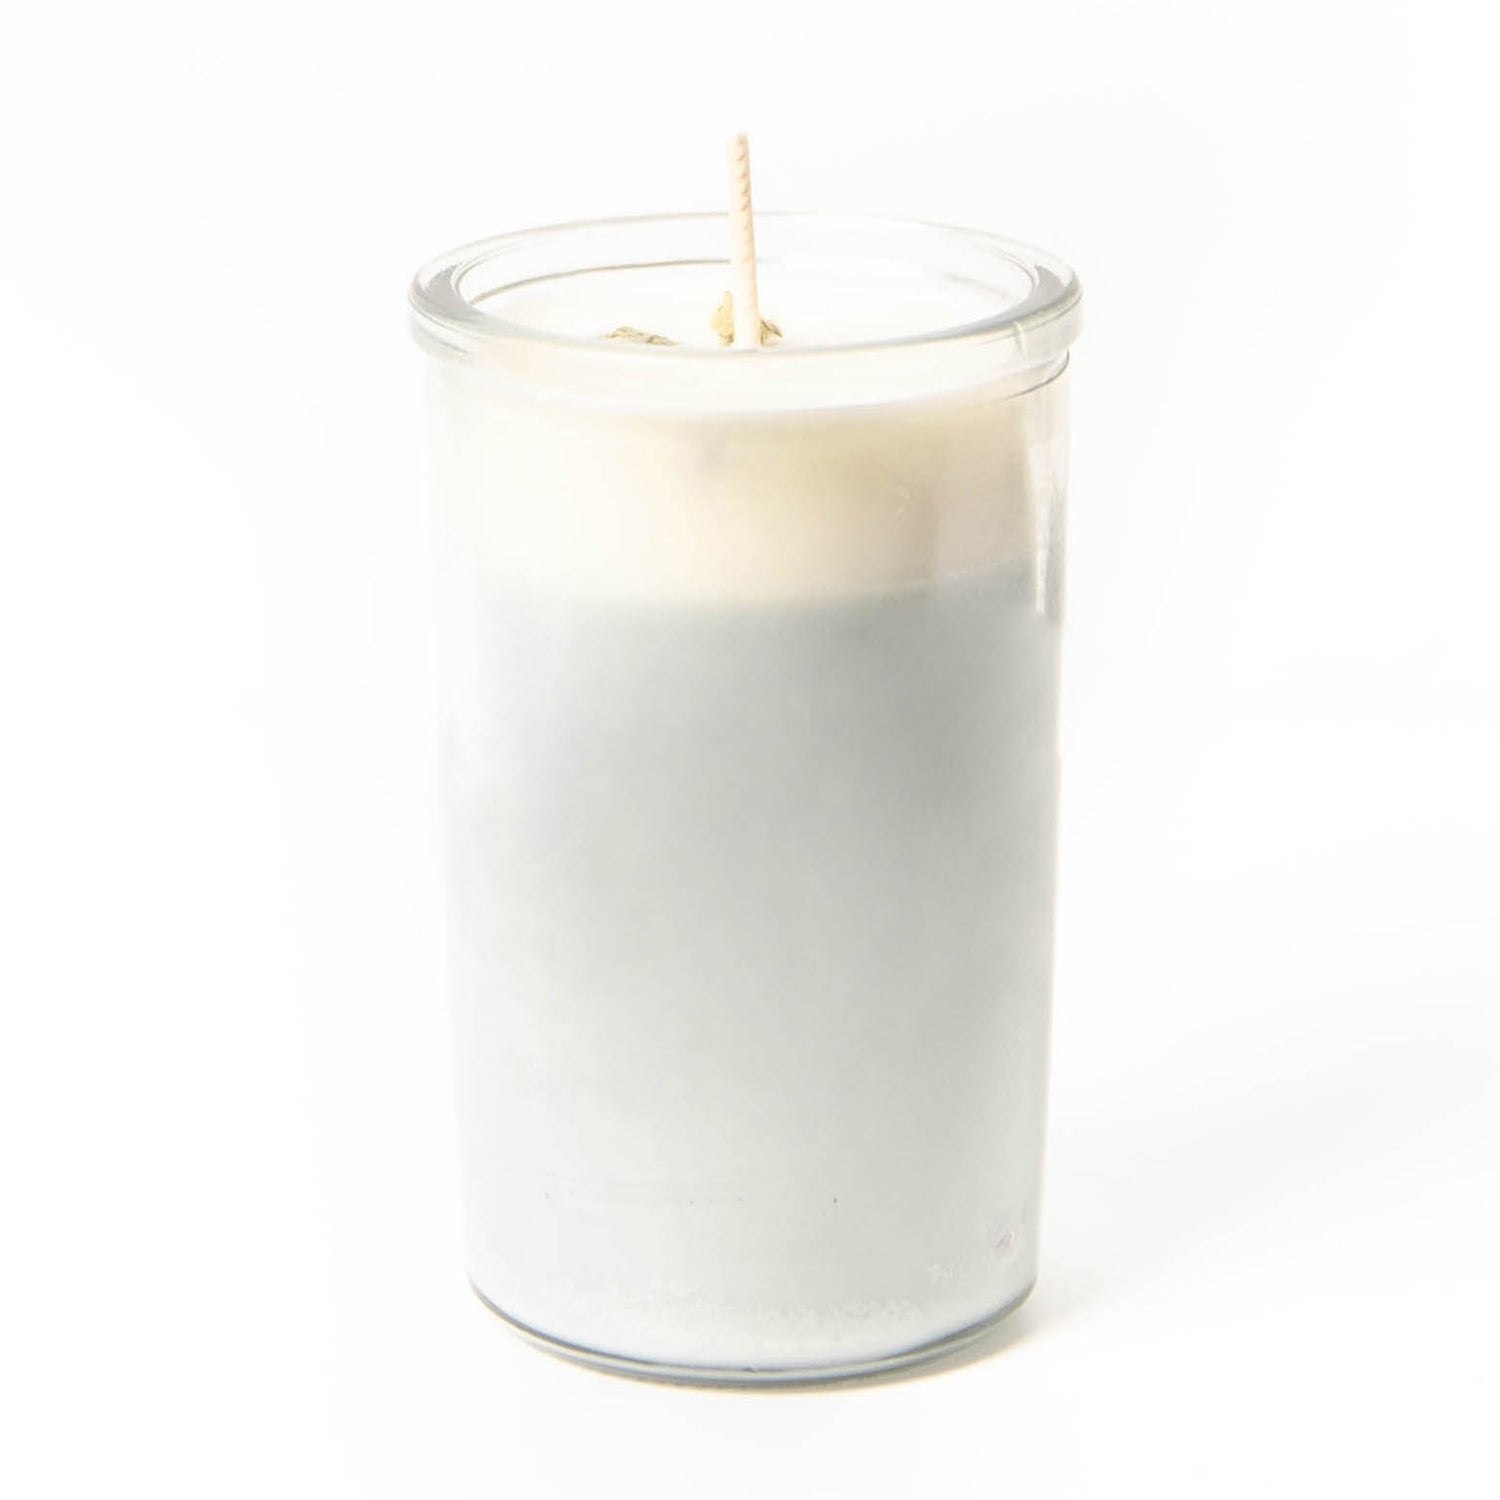 Letting Go Ritual Candle - Small